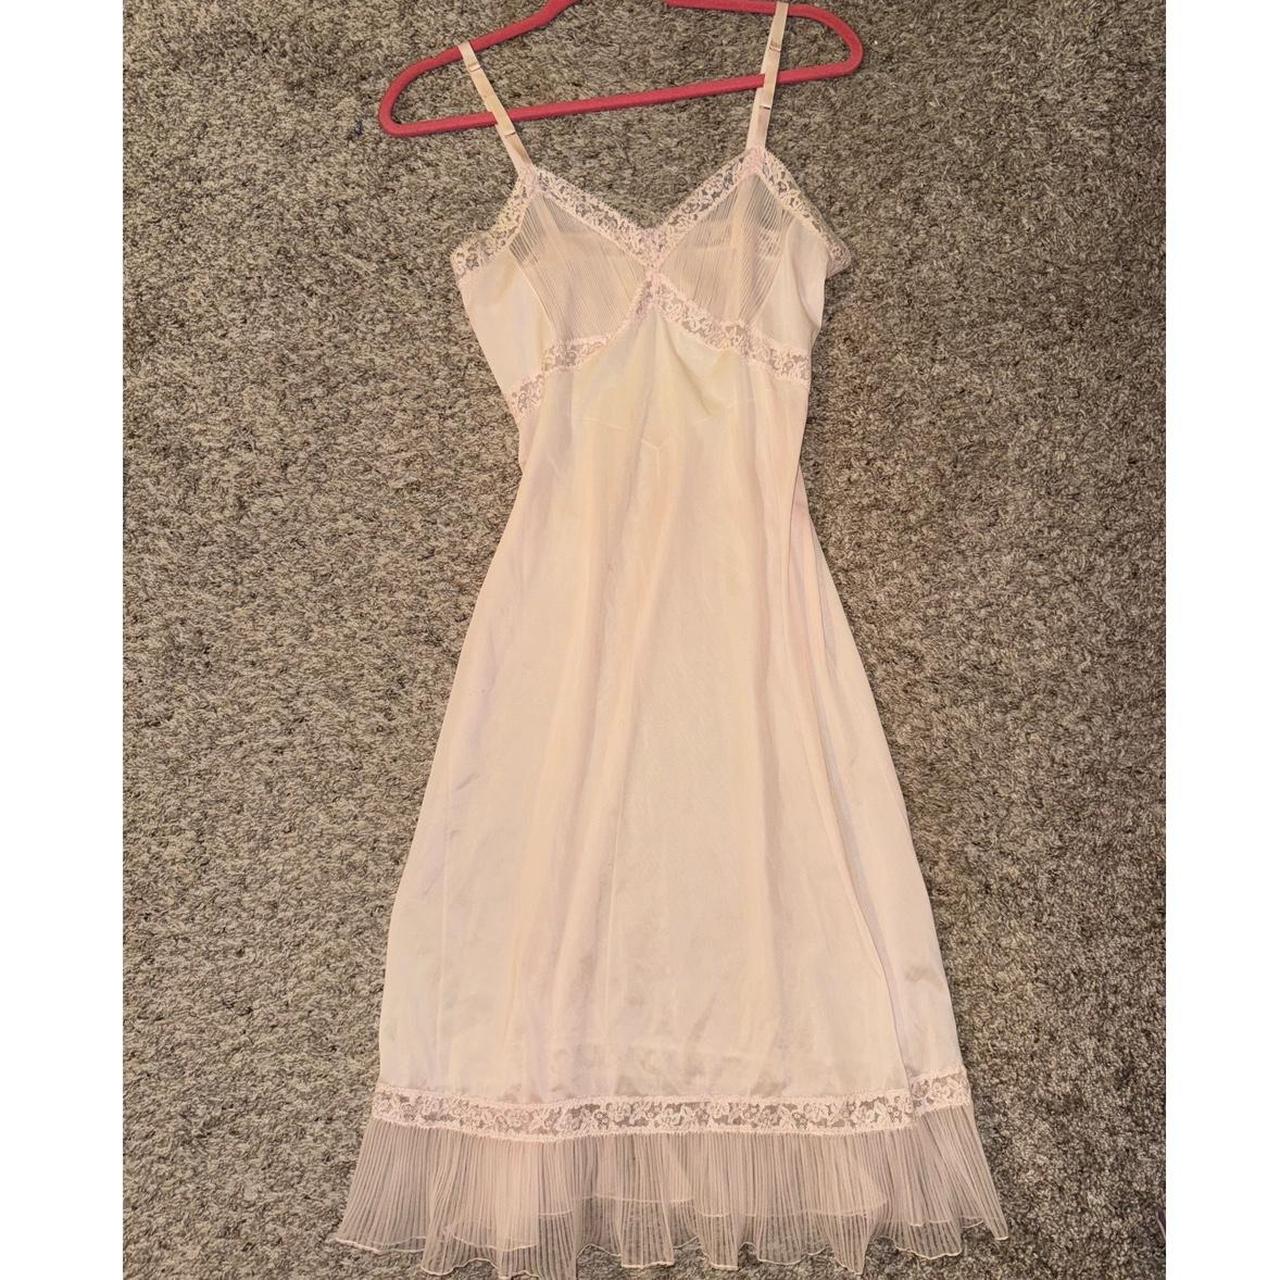 Vintage Slip Dress There are some tiny stains... - Depop